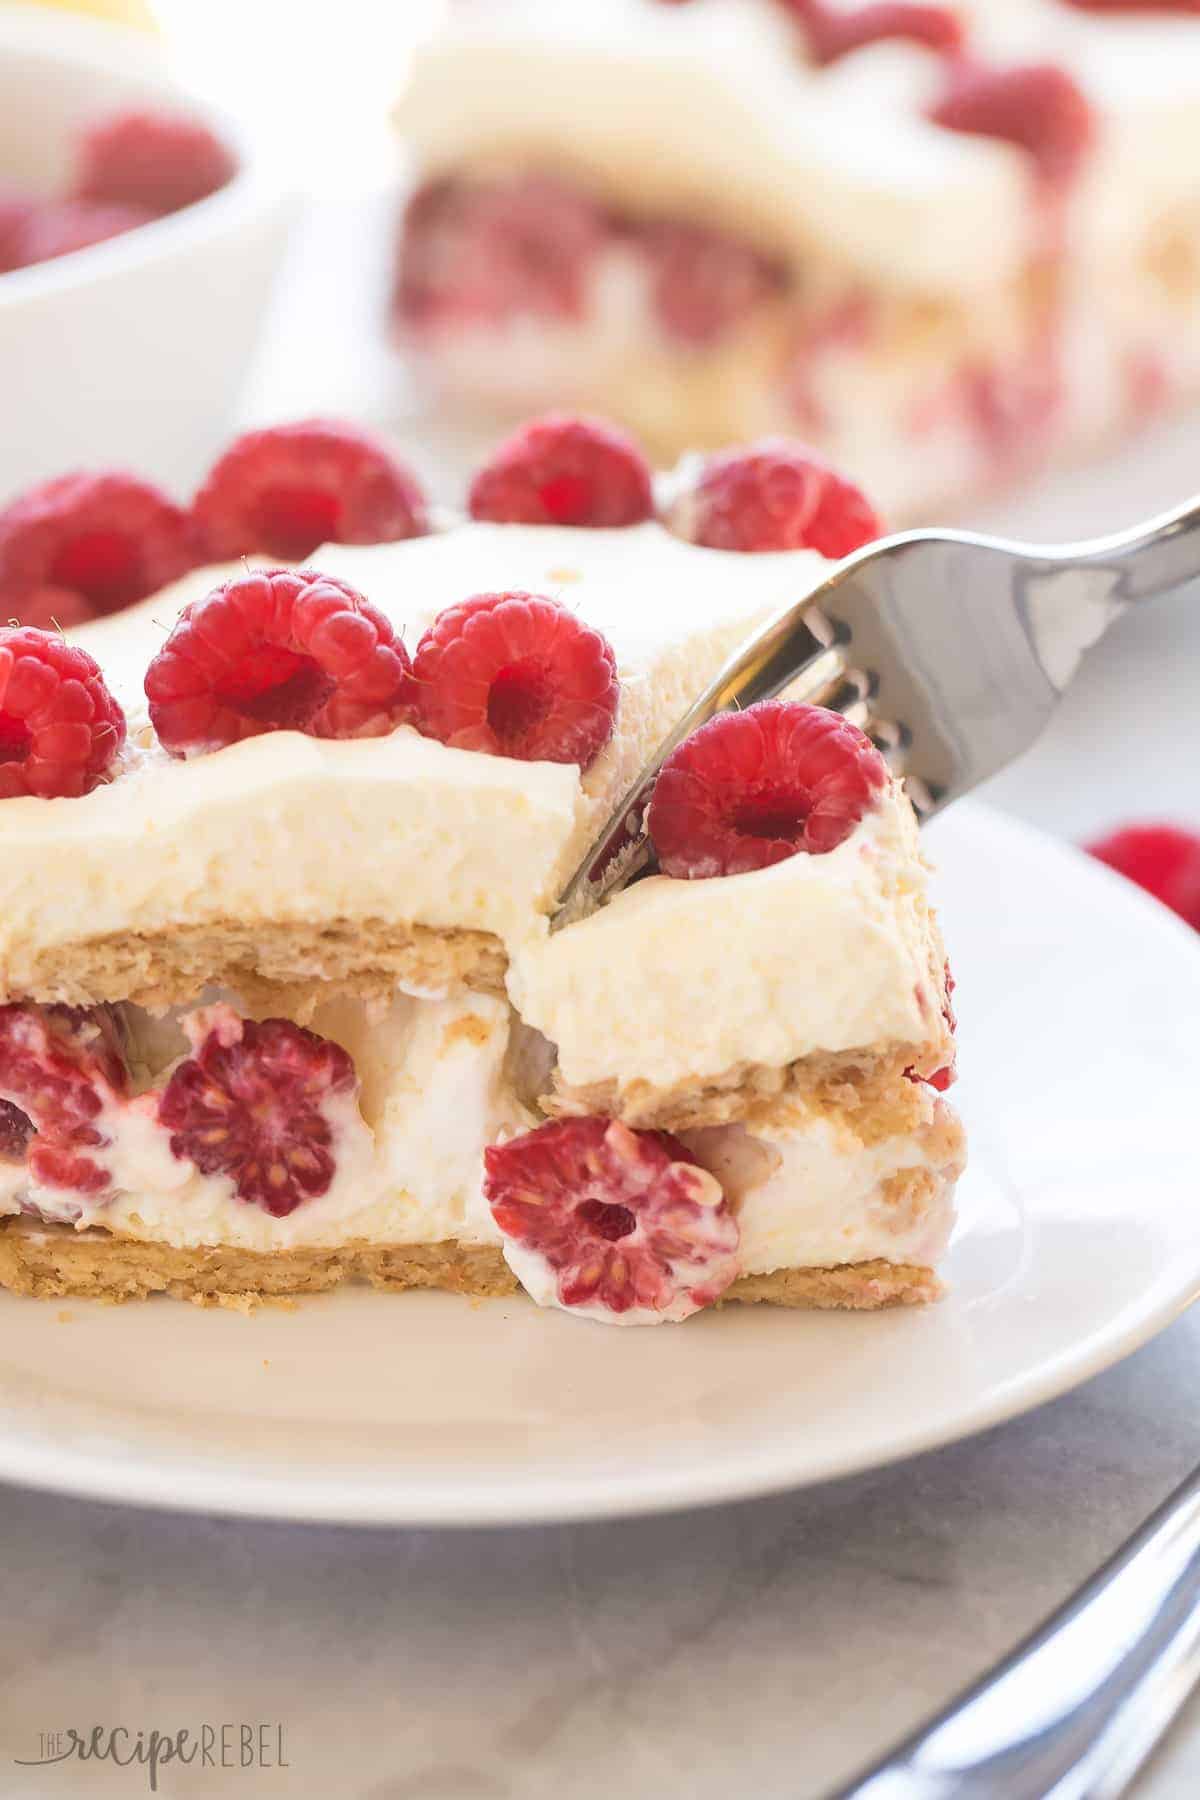 Graham crackers layered with whipped cream, lemon curd and a pile of fresh raspberries! This Lemon Raspberry Icebox Cake is an EASY no bake dessert for Spring!